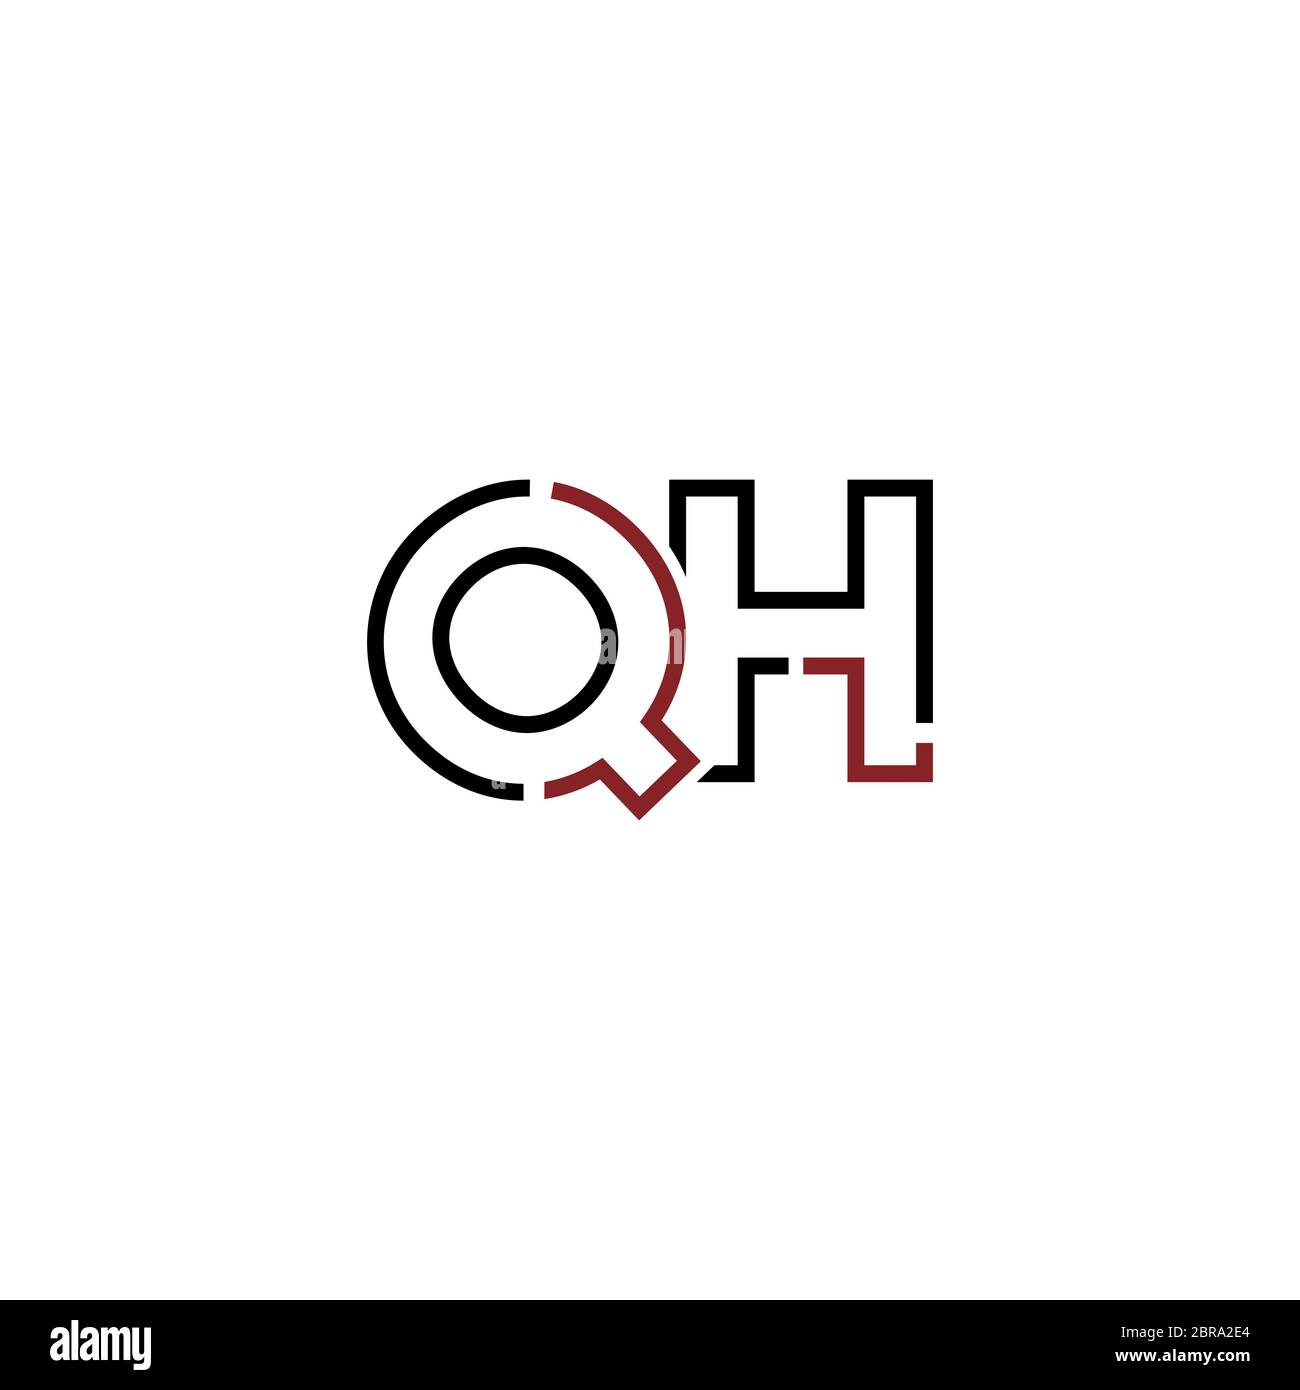 Letter QH logo icon design template elements Stock Vector Image ...